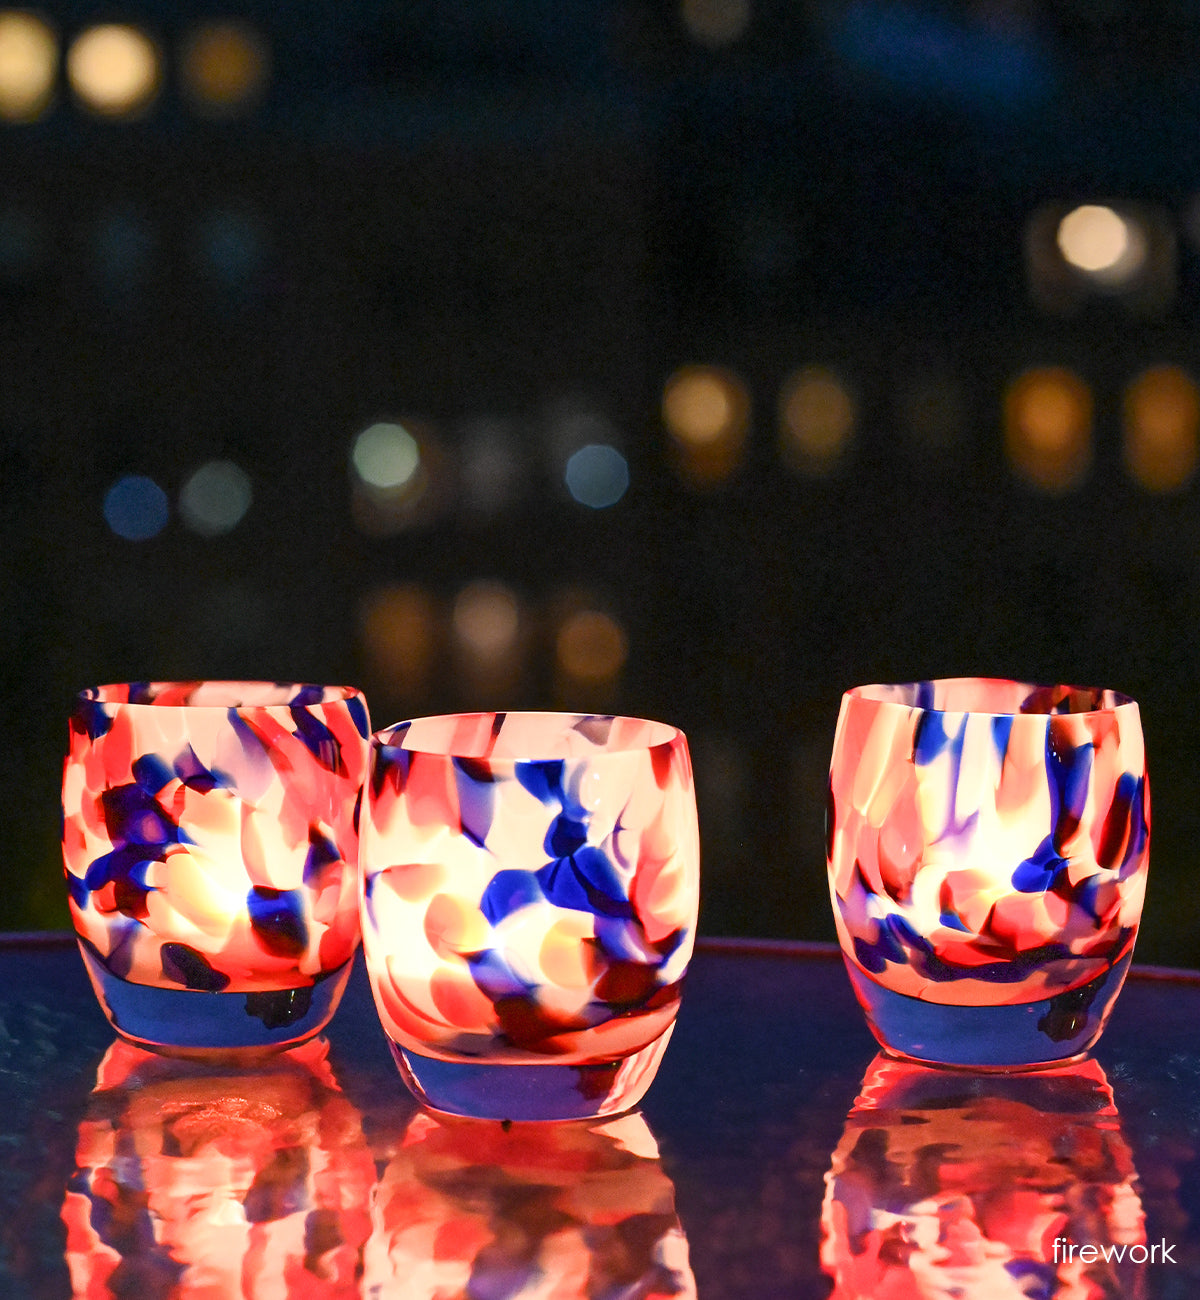 one of a kindness firework, red white and blue petal, hand-blown glass votive candle holder.